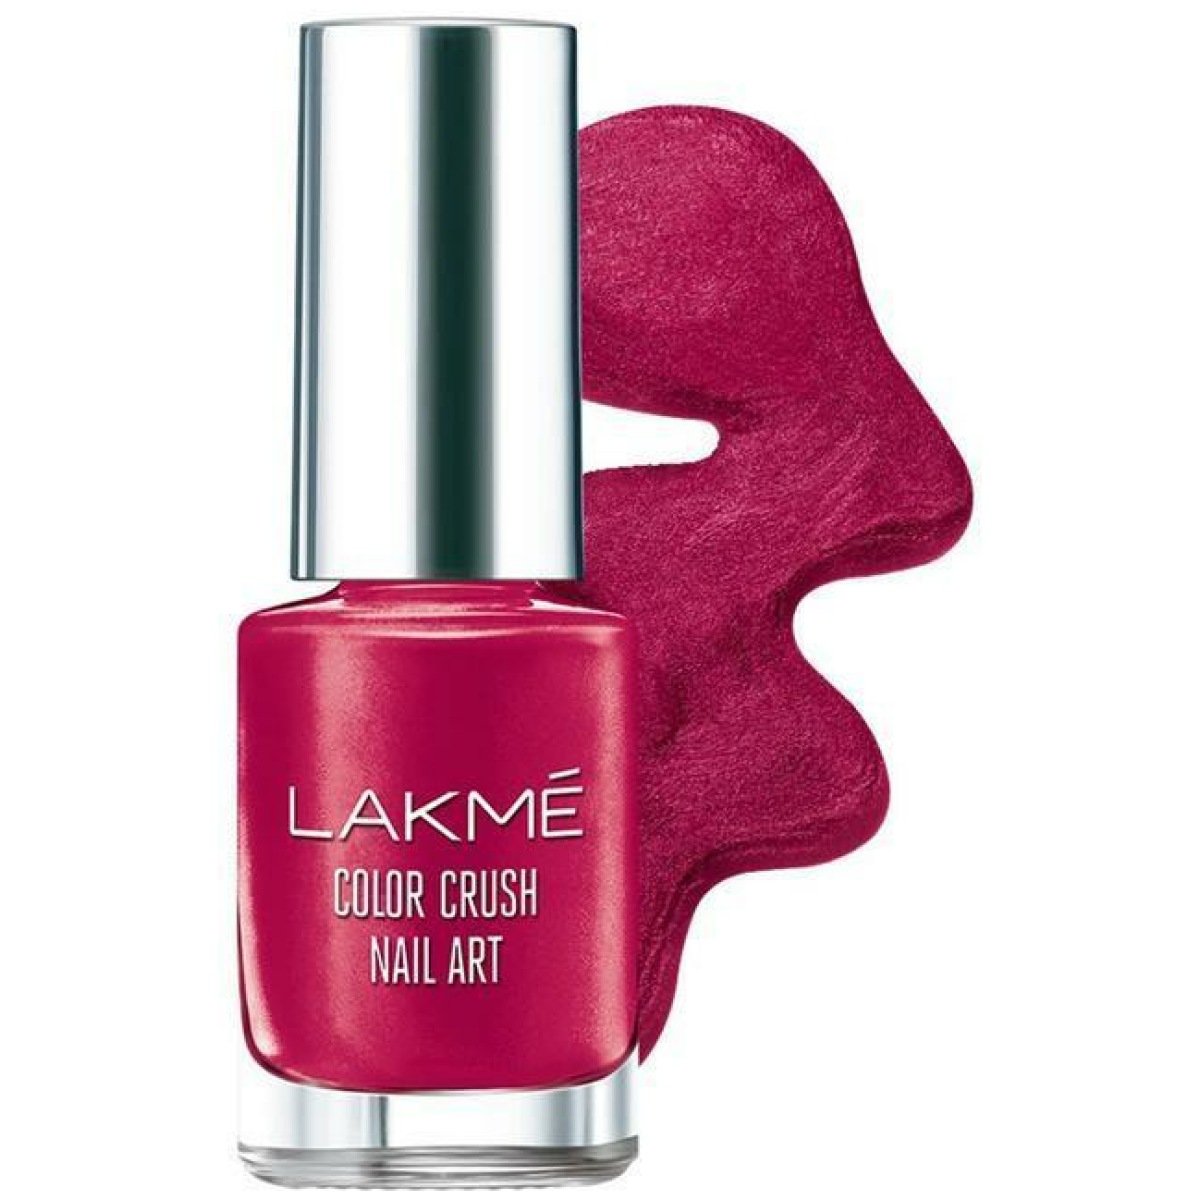 Buy Lakmé Absolute Gel Stylist Nail Color, Shimmery Finish, Silhouette,  12Ml Online at Low Prices in India - Amazon.in